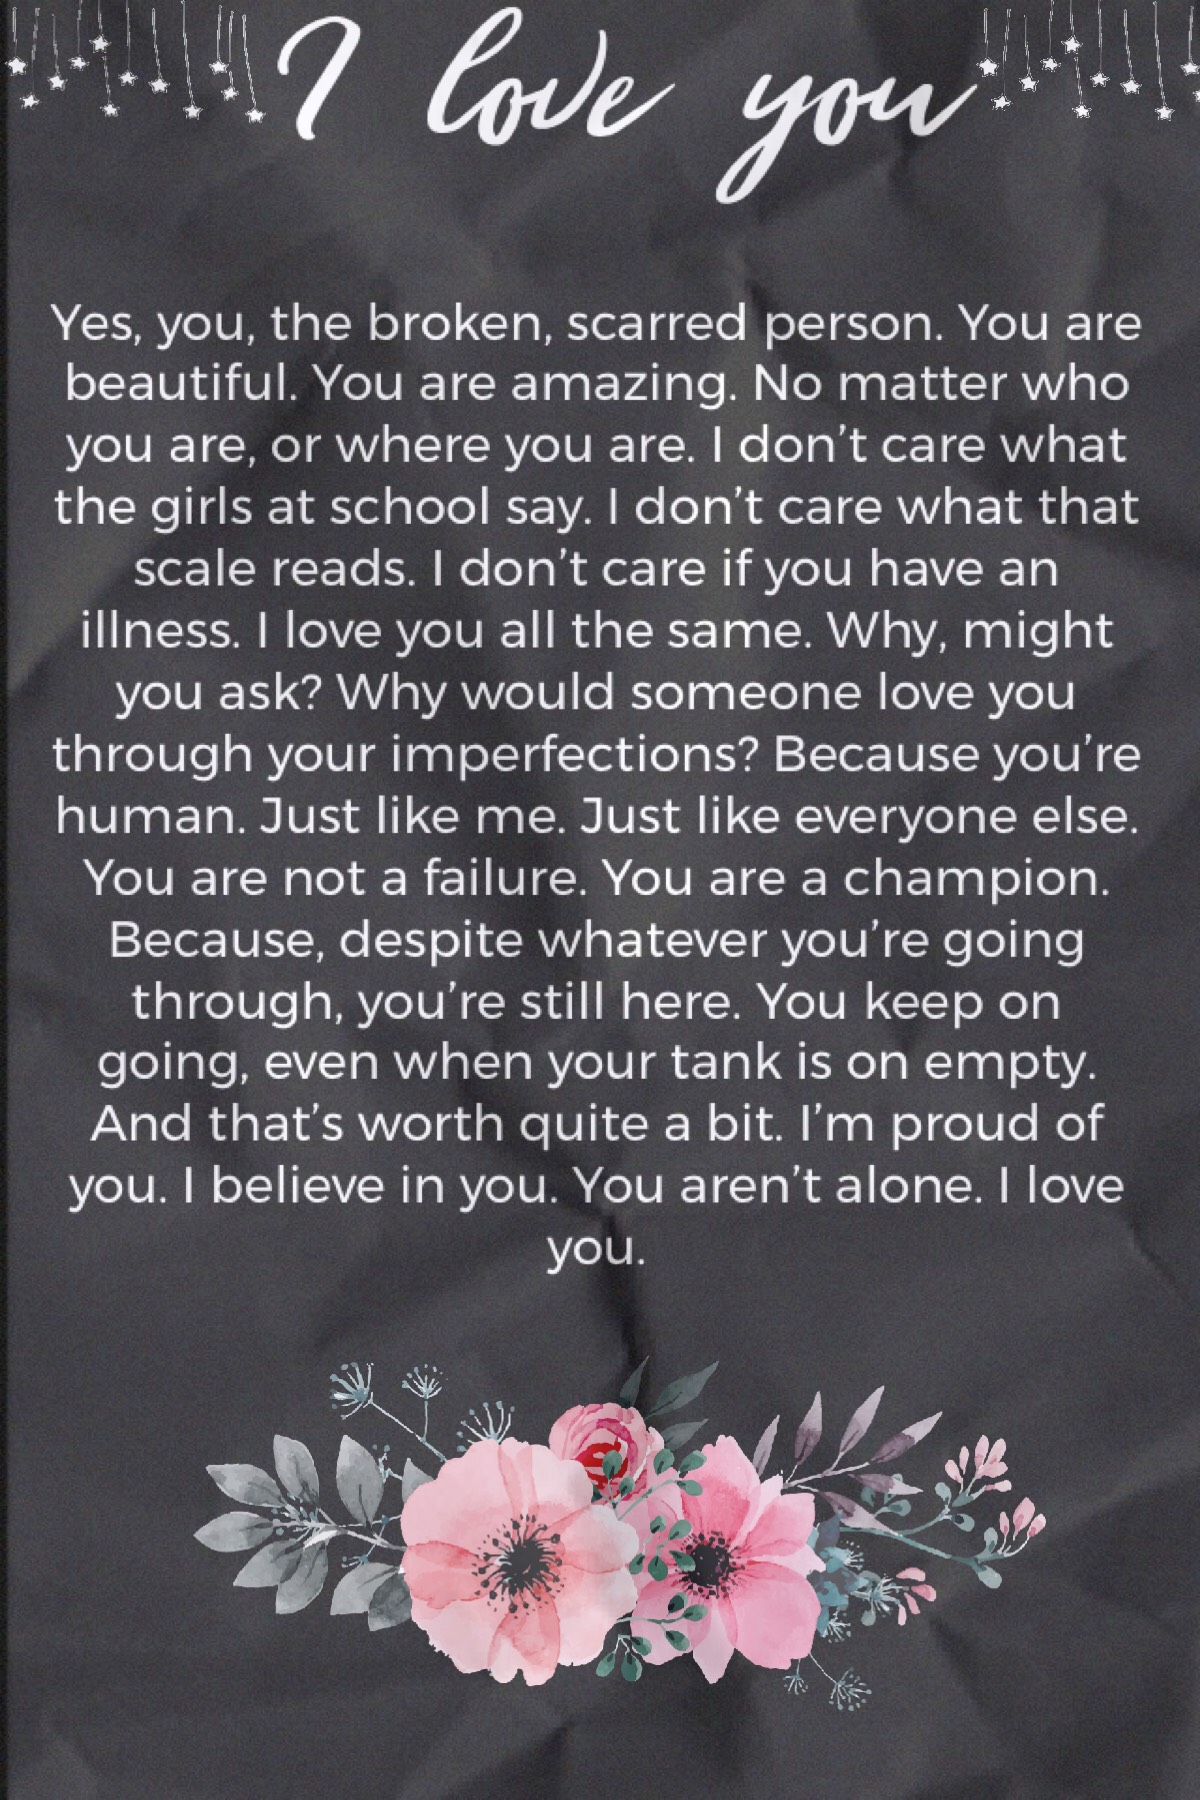 Hey everyone. It’s Lady-Starlight here. I posted this on my page a while ago, but I feel like more people need to see it. I would post a normal collage, but I have a gut feeling that this needs to be here. I love you all 💕